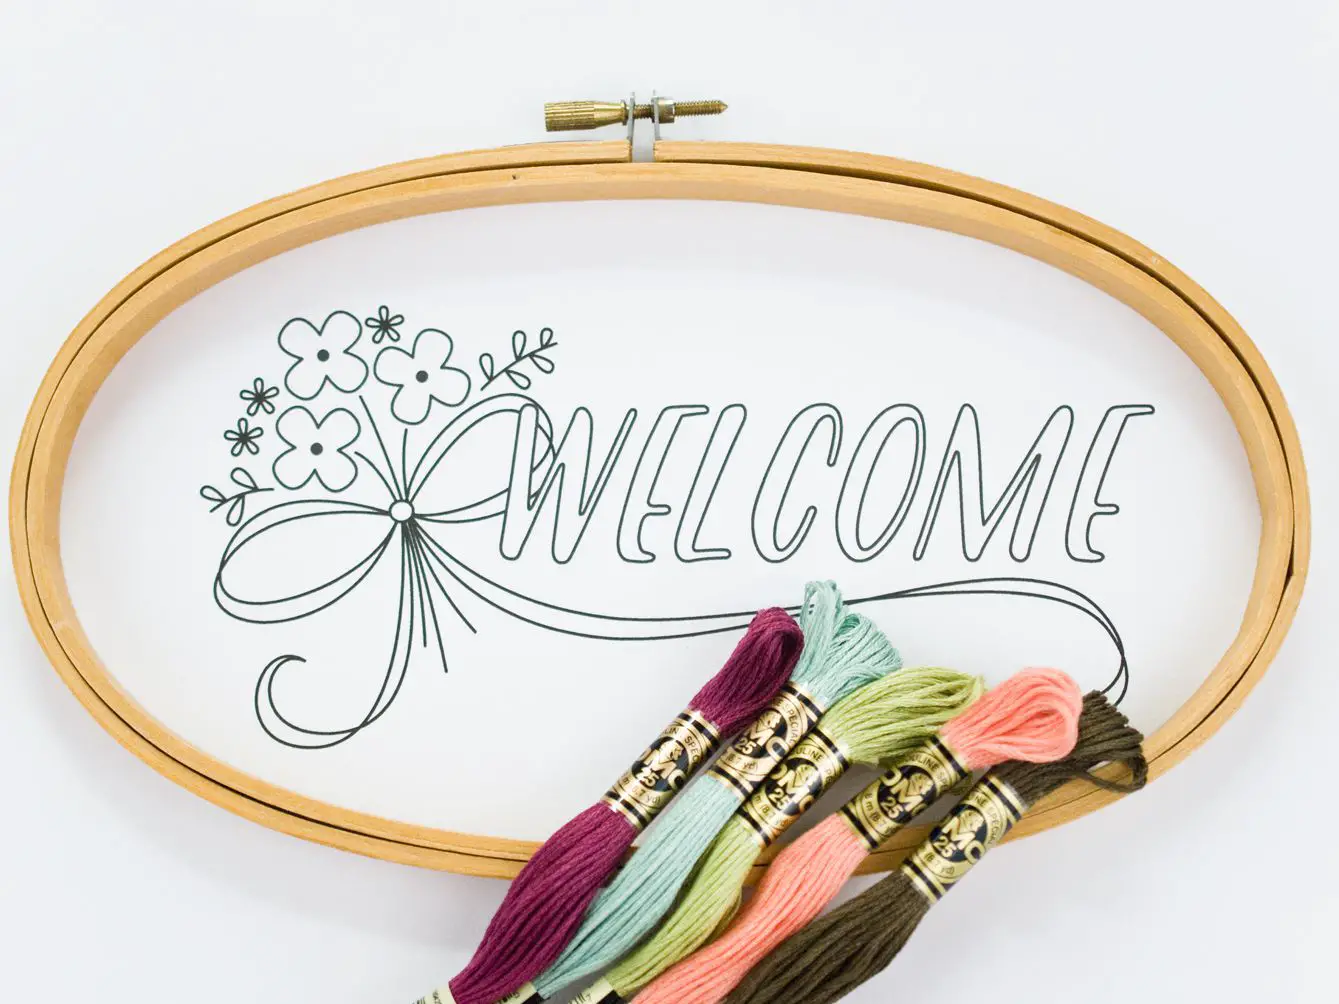 22 Simple And Easy Embroidery Designs To Start With Sewing Skills